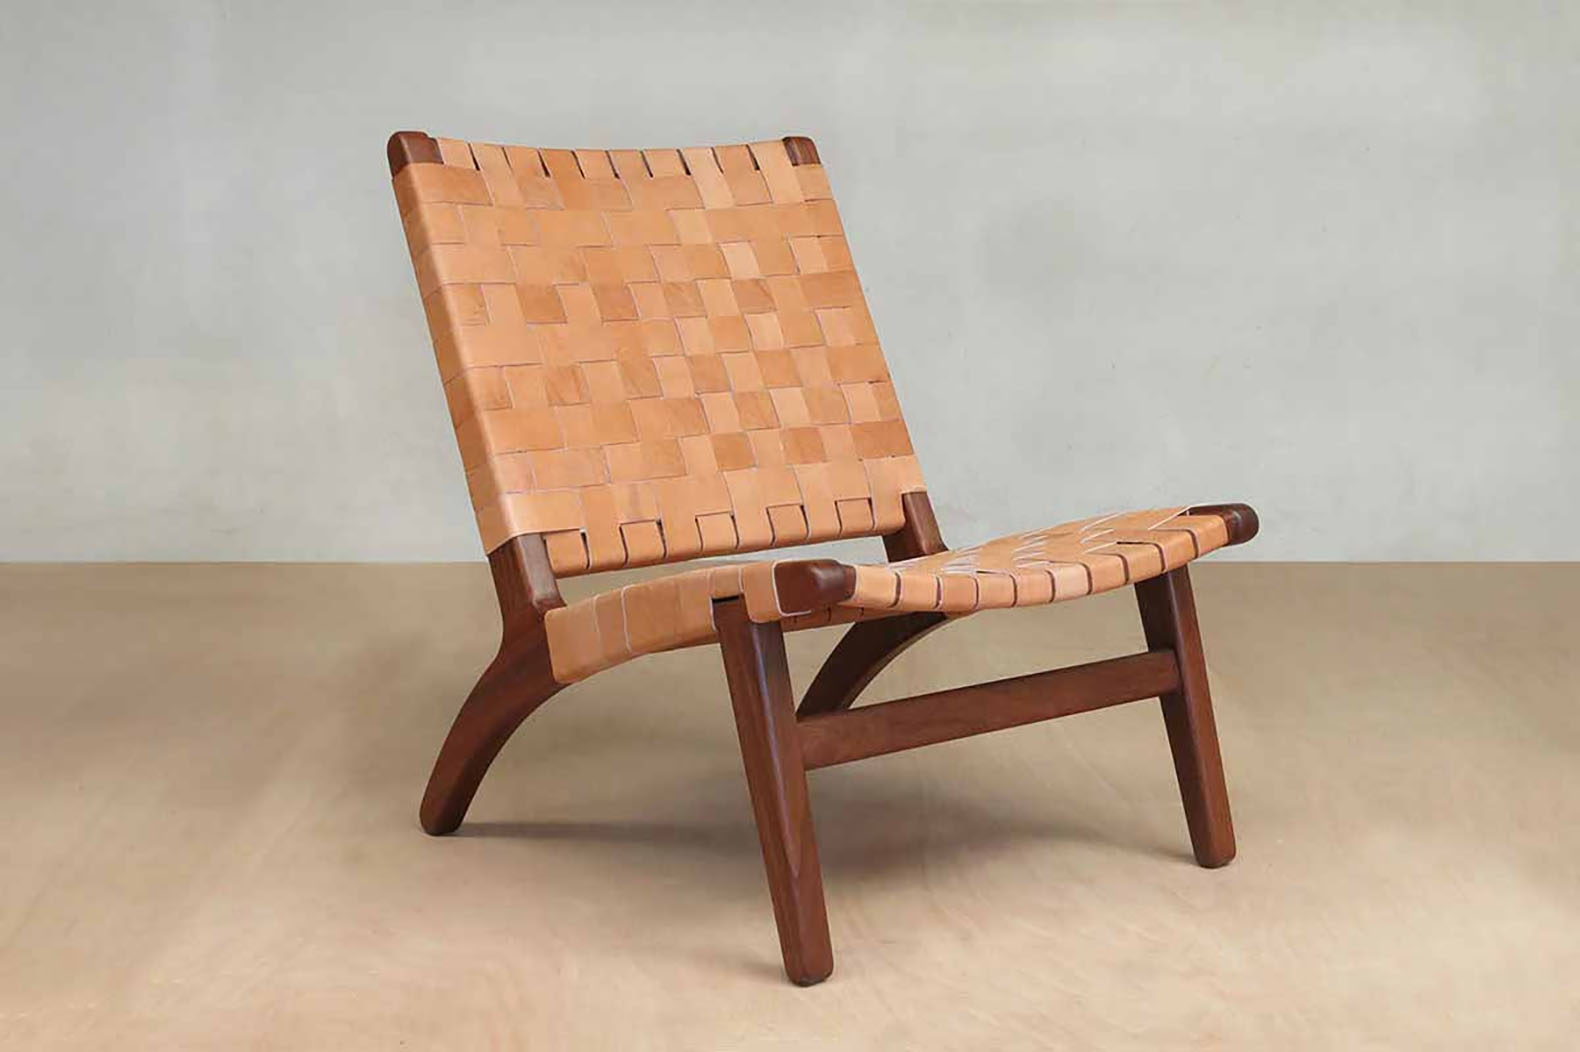 sustainable furniture masaya u0026 company plants 100 trees for every piece of furniture ALJWMBF